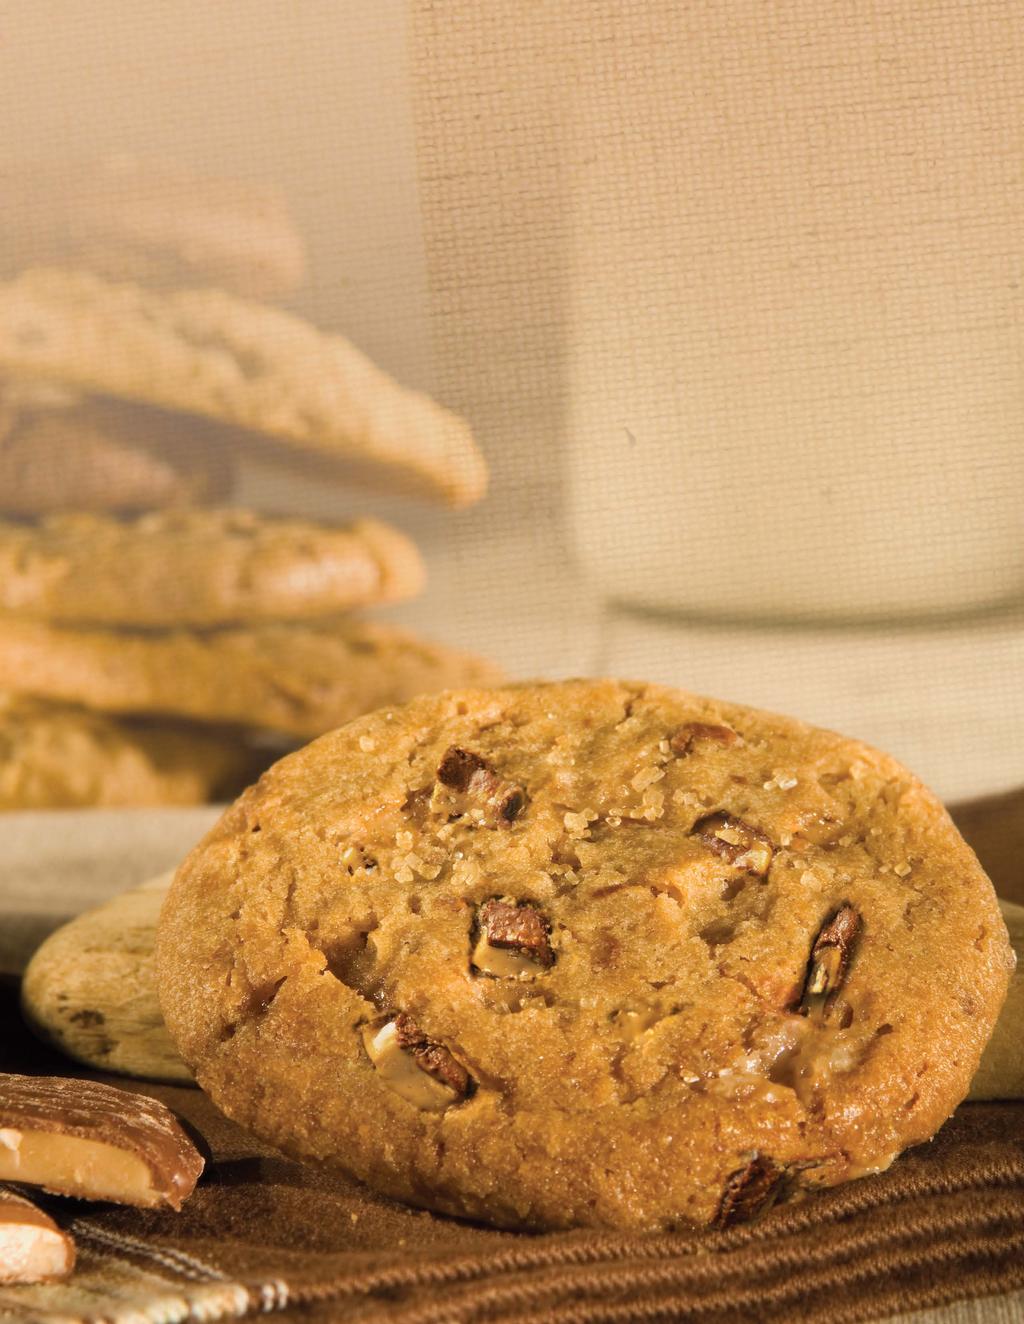 Sweet treats for every palate, cookies from Vie de